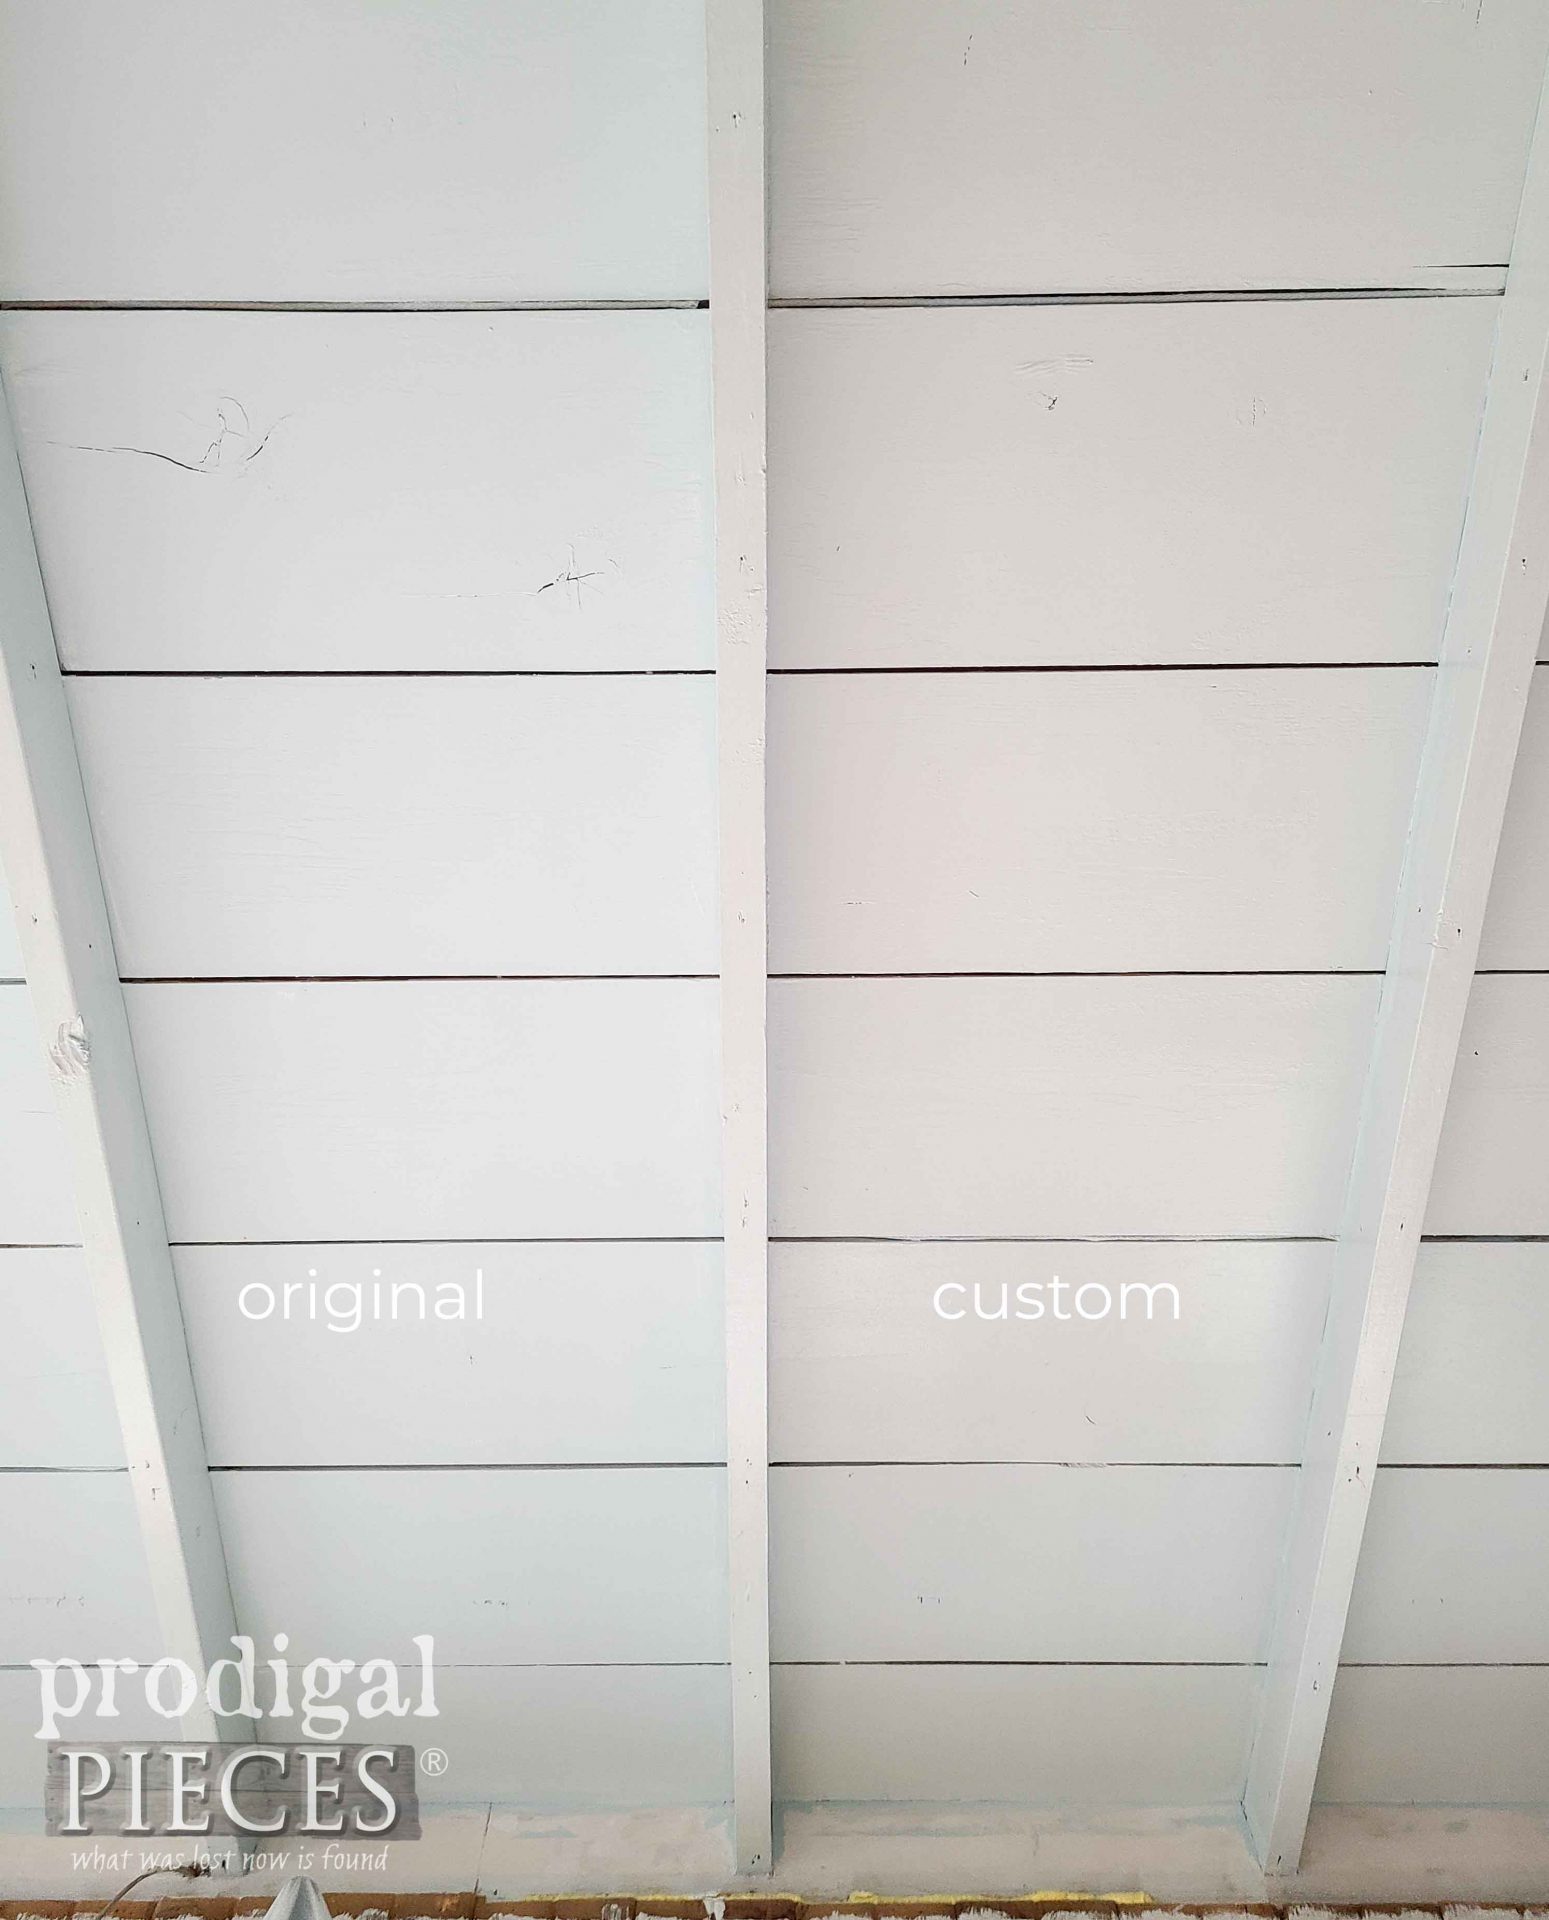 Custom Mixed Dining Room Ceiling Paint Color by Larissa of Prodigal Pieces | prodigalpieces.com #prodigalpieces